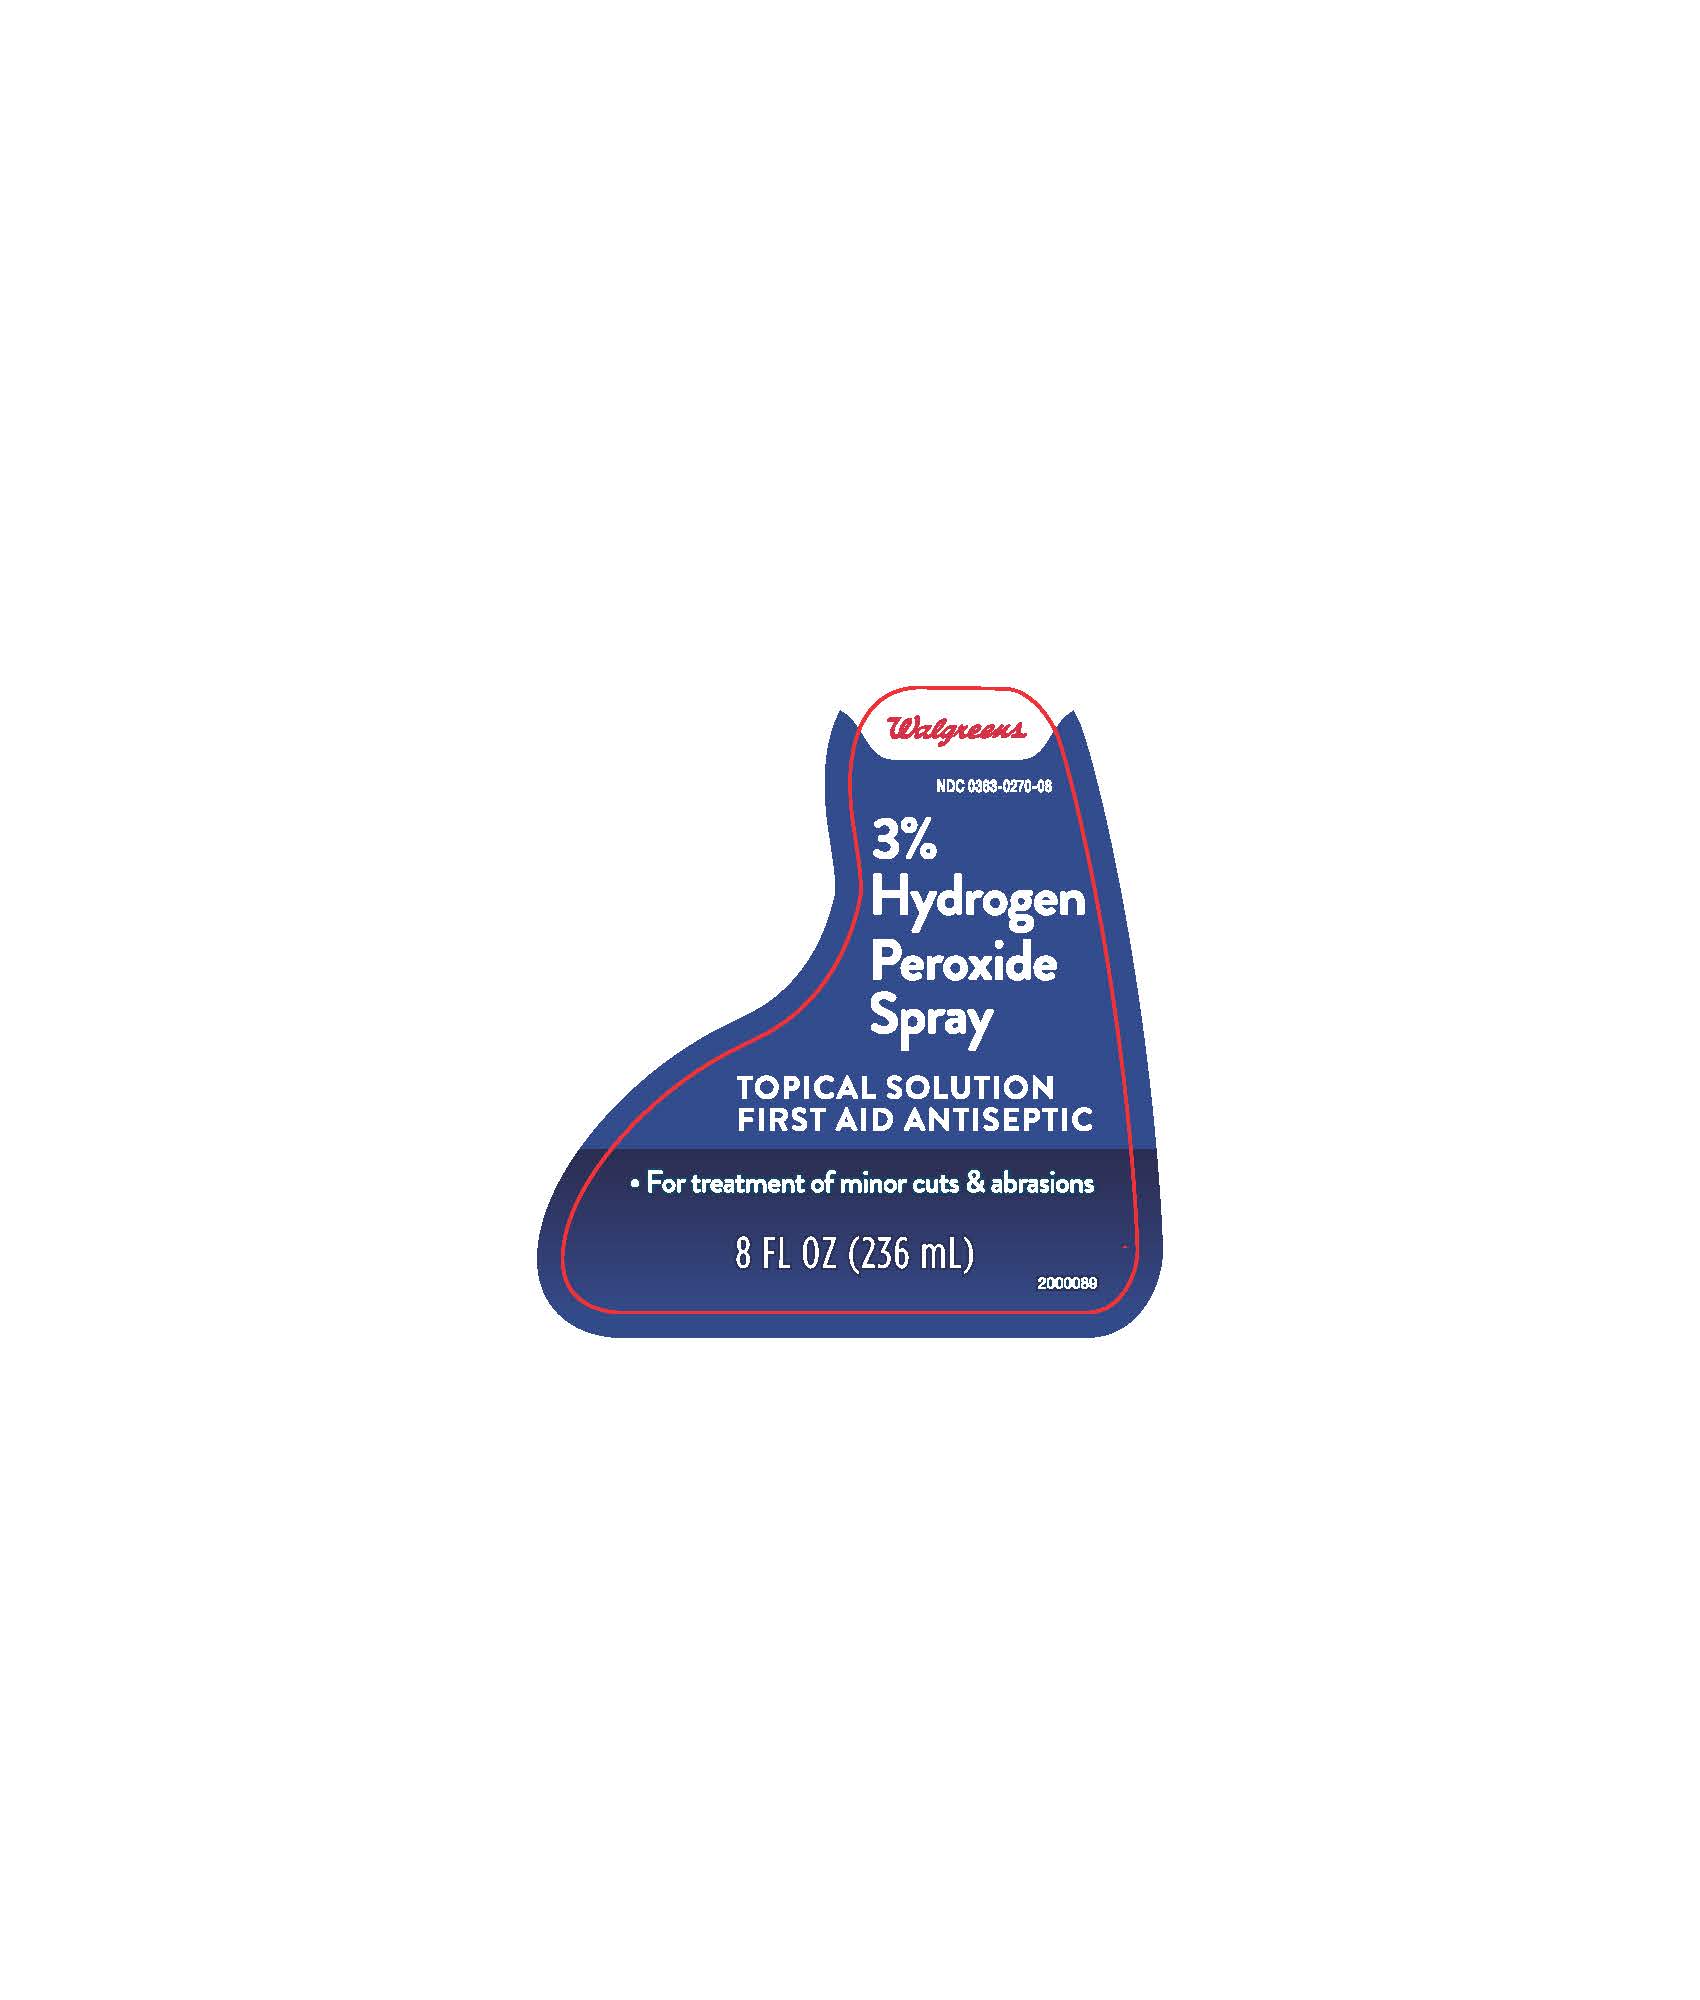 Hydrogen Peroxide Antiseptic Solution 16 Fl. Oz (Pack of 1)